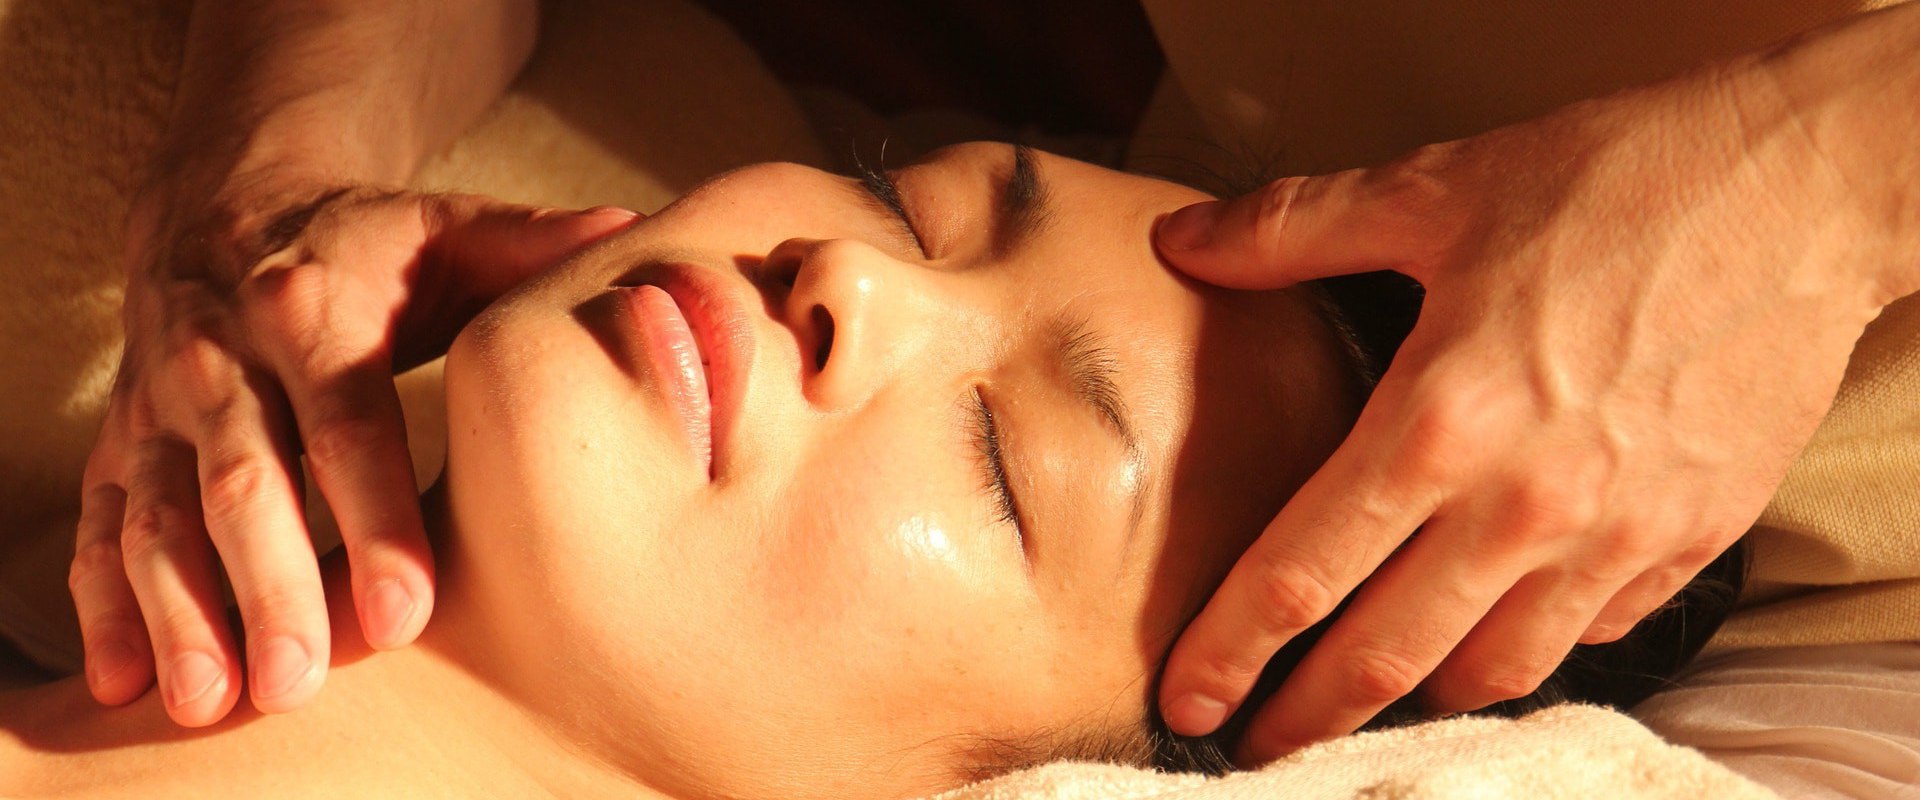 Thai Massage Therapy In Madrid, Spain And Its Health Benefits